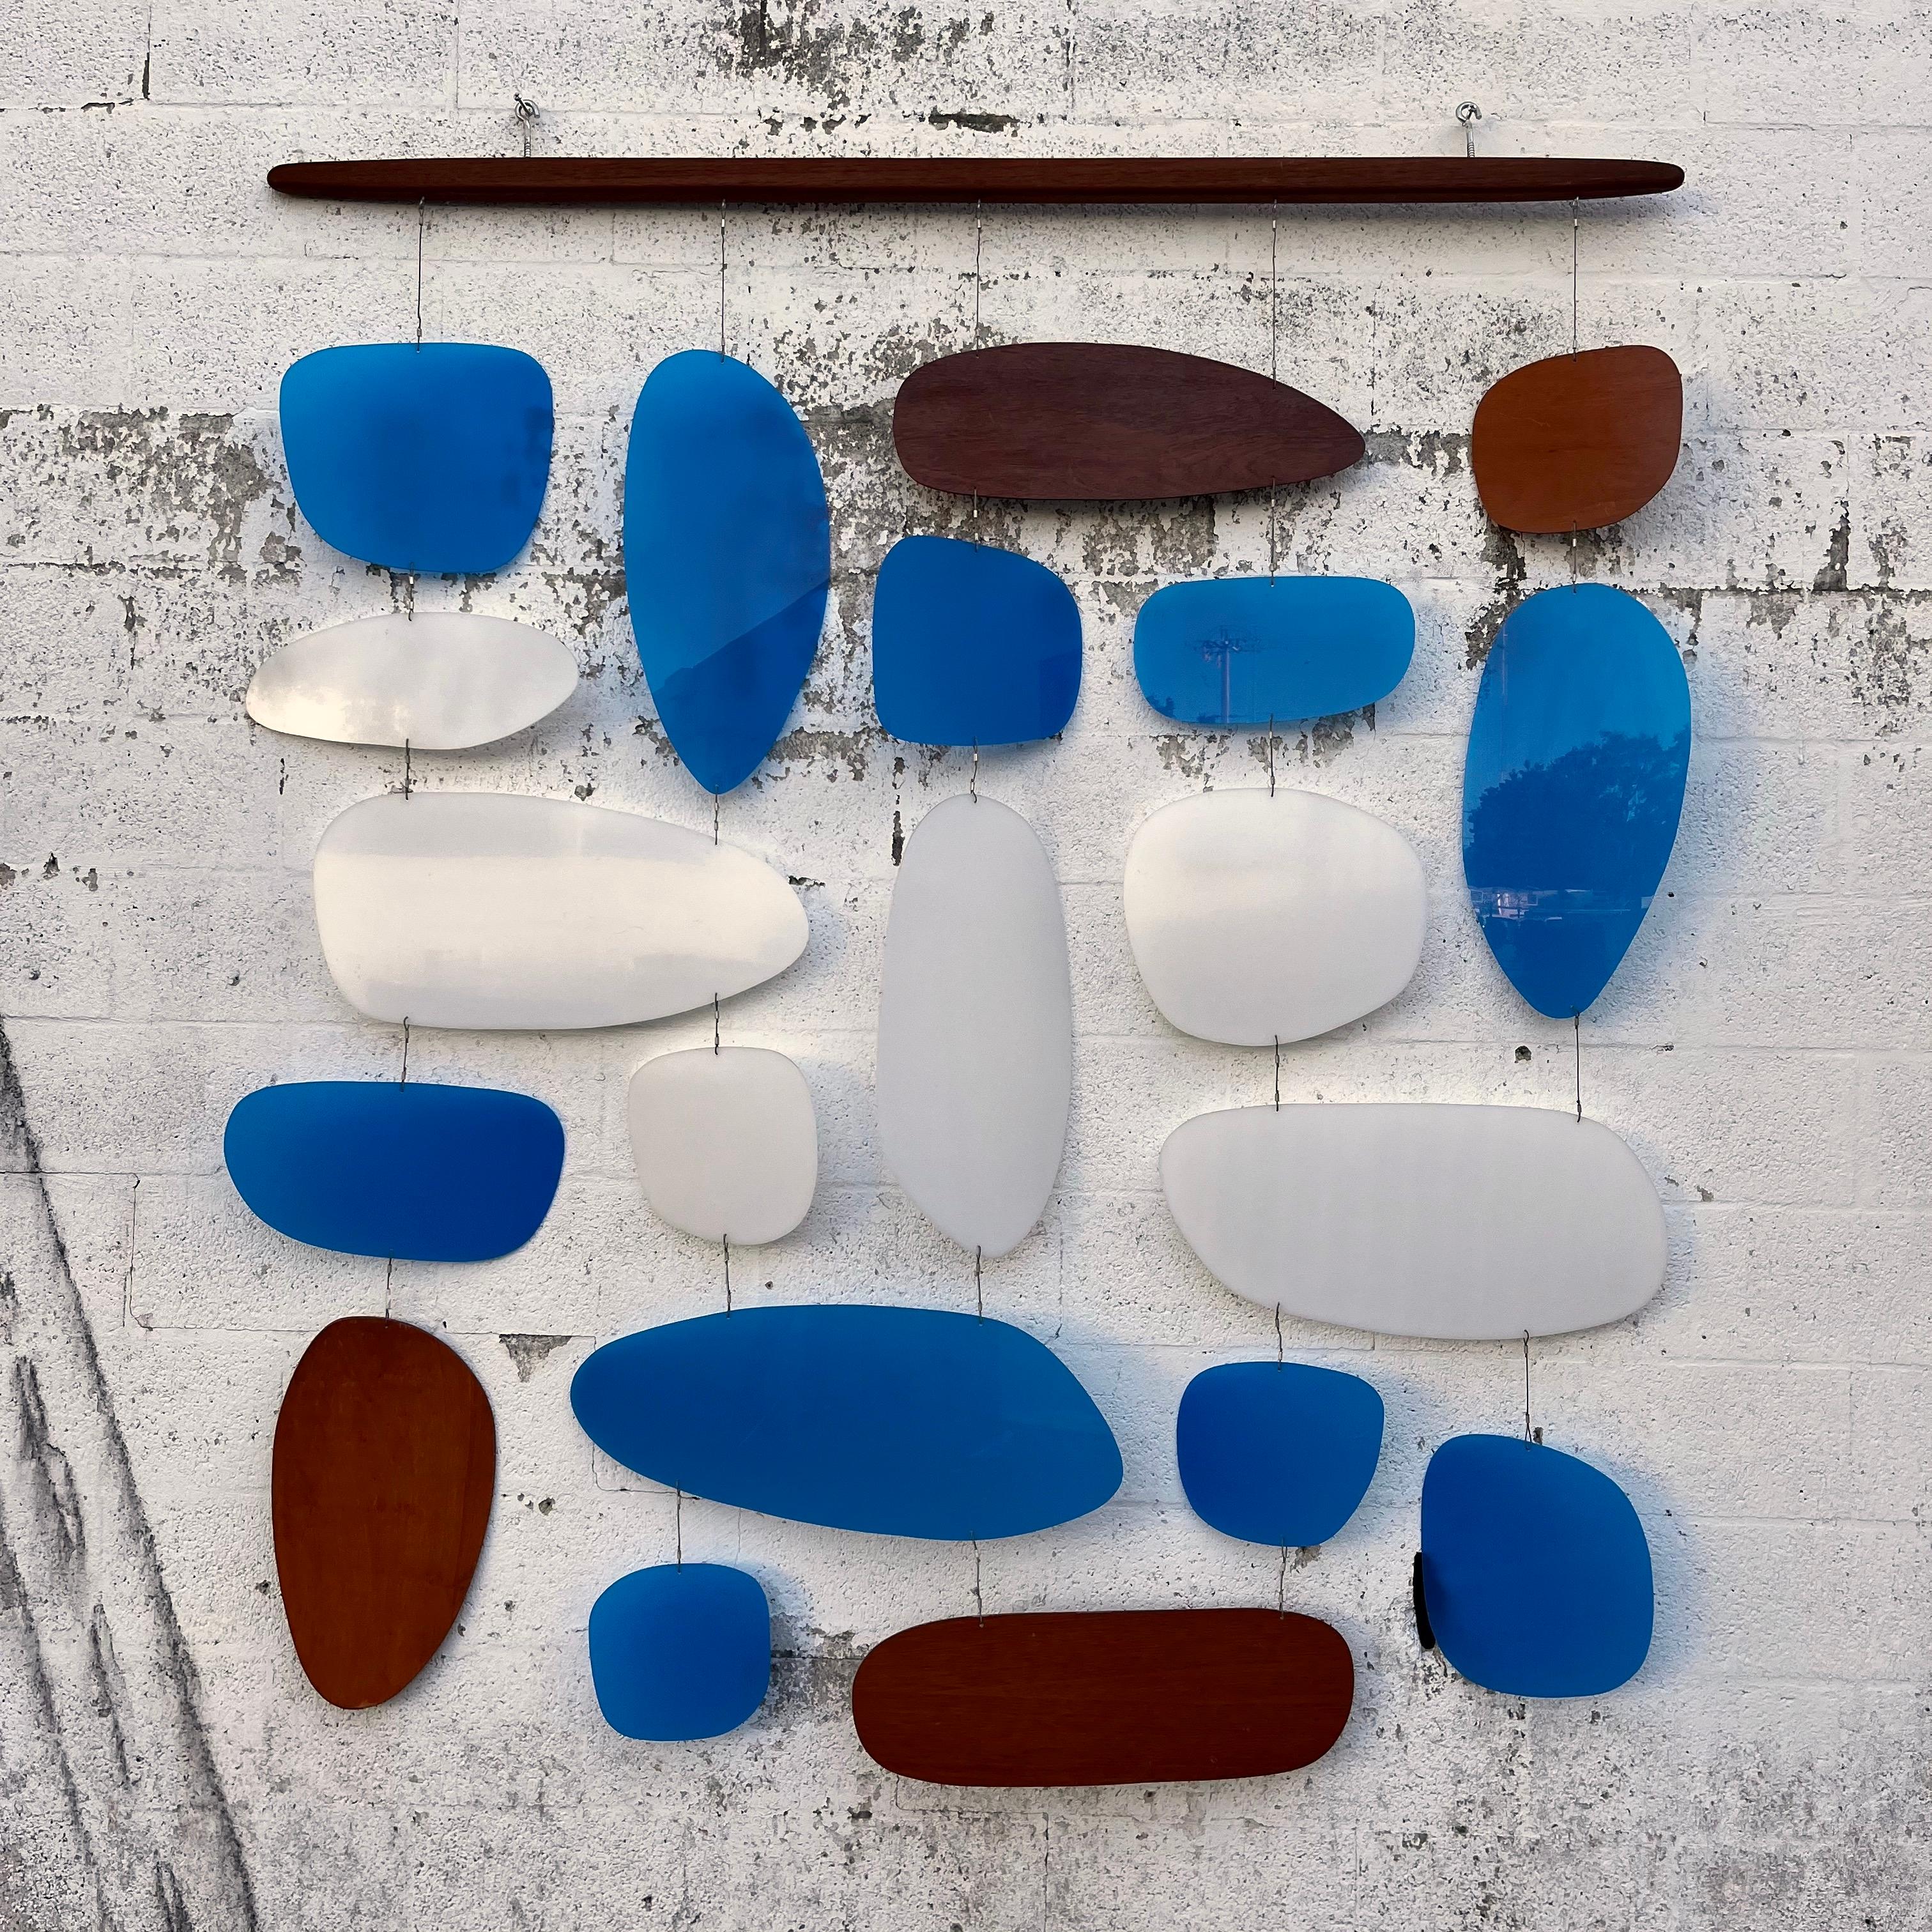 Vintage 1960s Modernist inspired handcrafted hanging wall sculpture / room divider by New Zealand Artist Andrew Reid. circa 1990s.
Features a combination of geometric shapes with rounded edges hand cut out translucent acrylic and plywood, connected